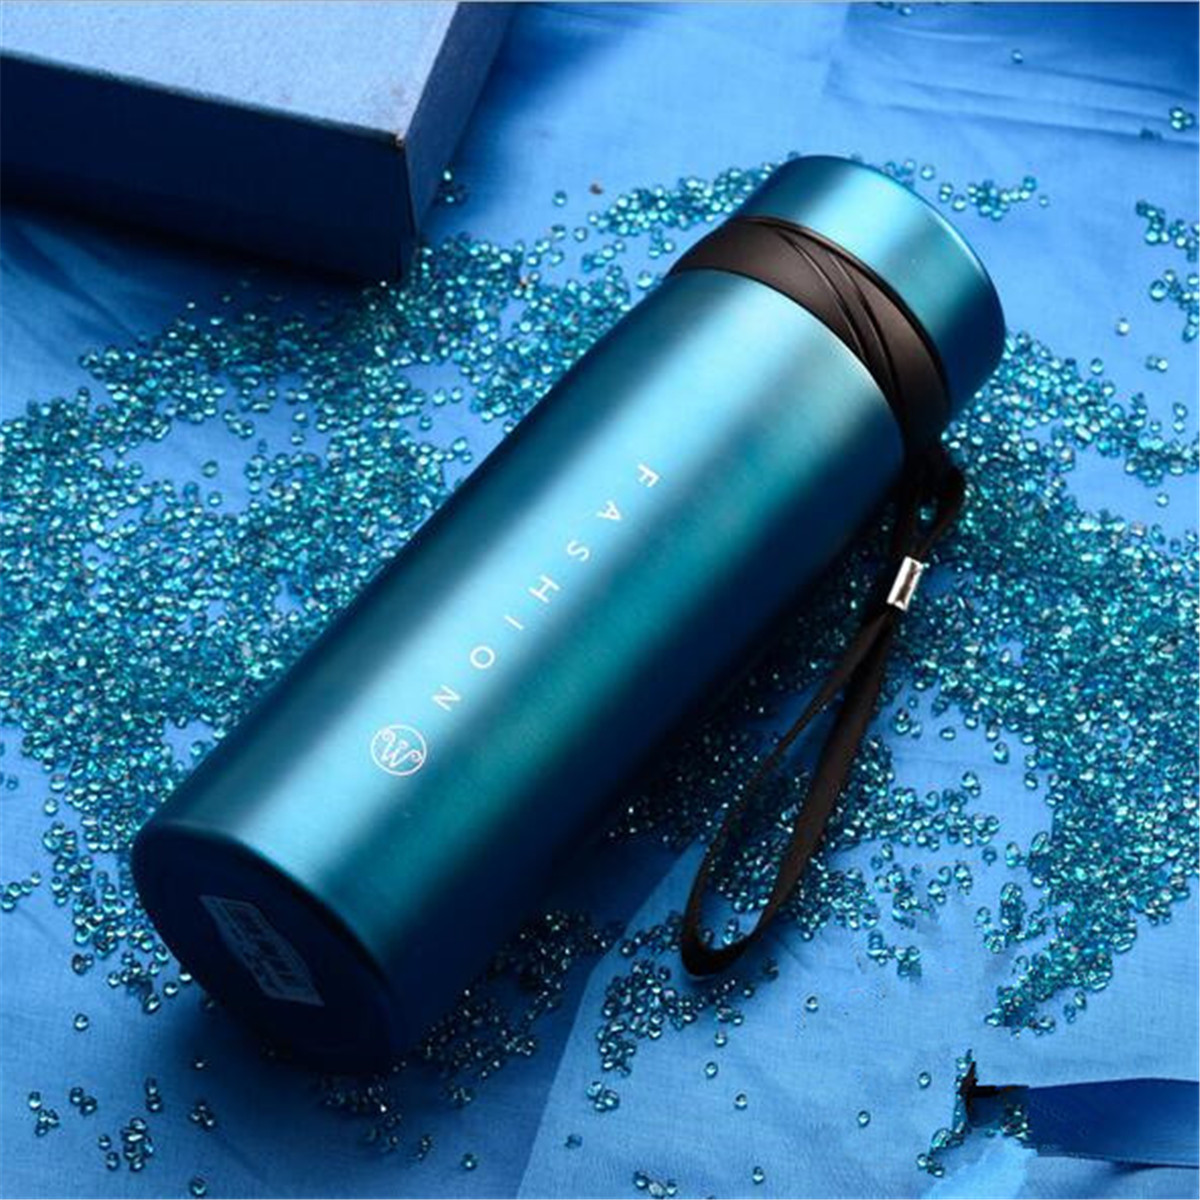 650/900ml Stainless Steel Vacuum Flask Water Bottle Thermo Coffee Travel Mug Cup